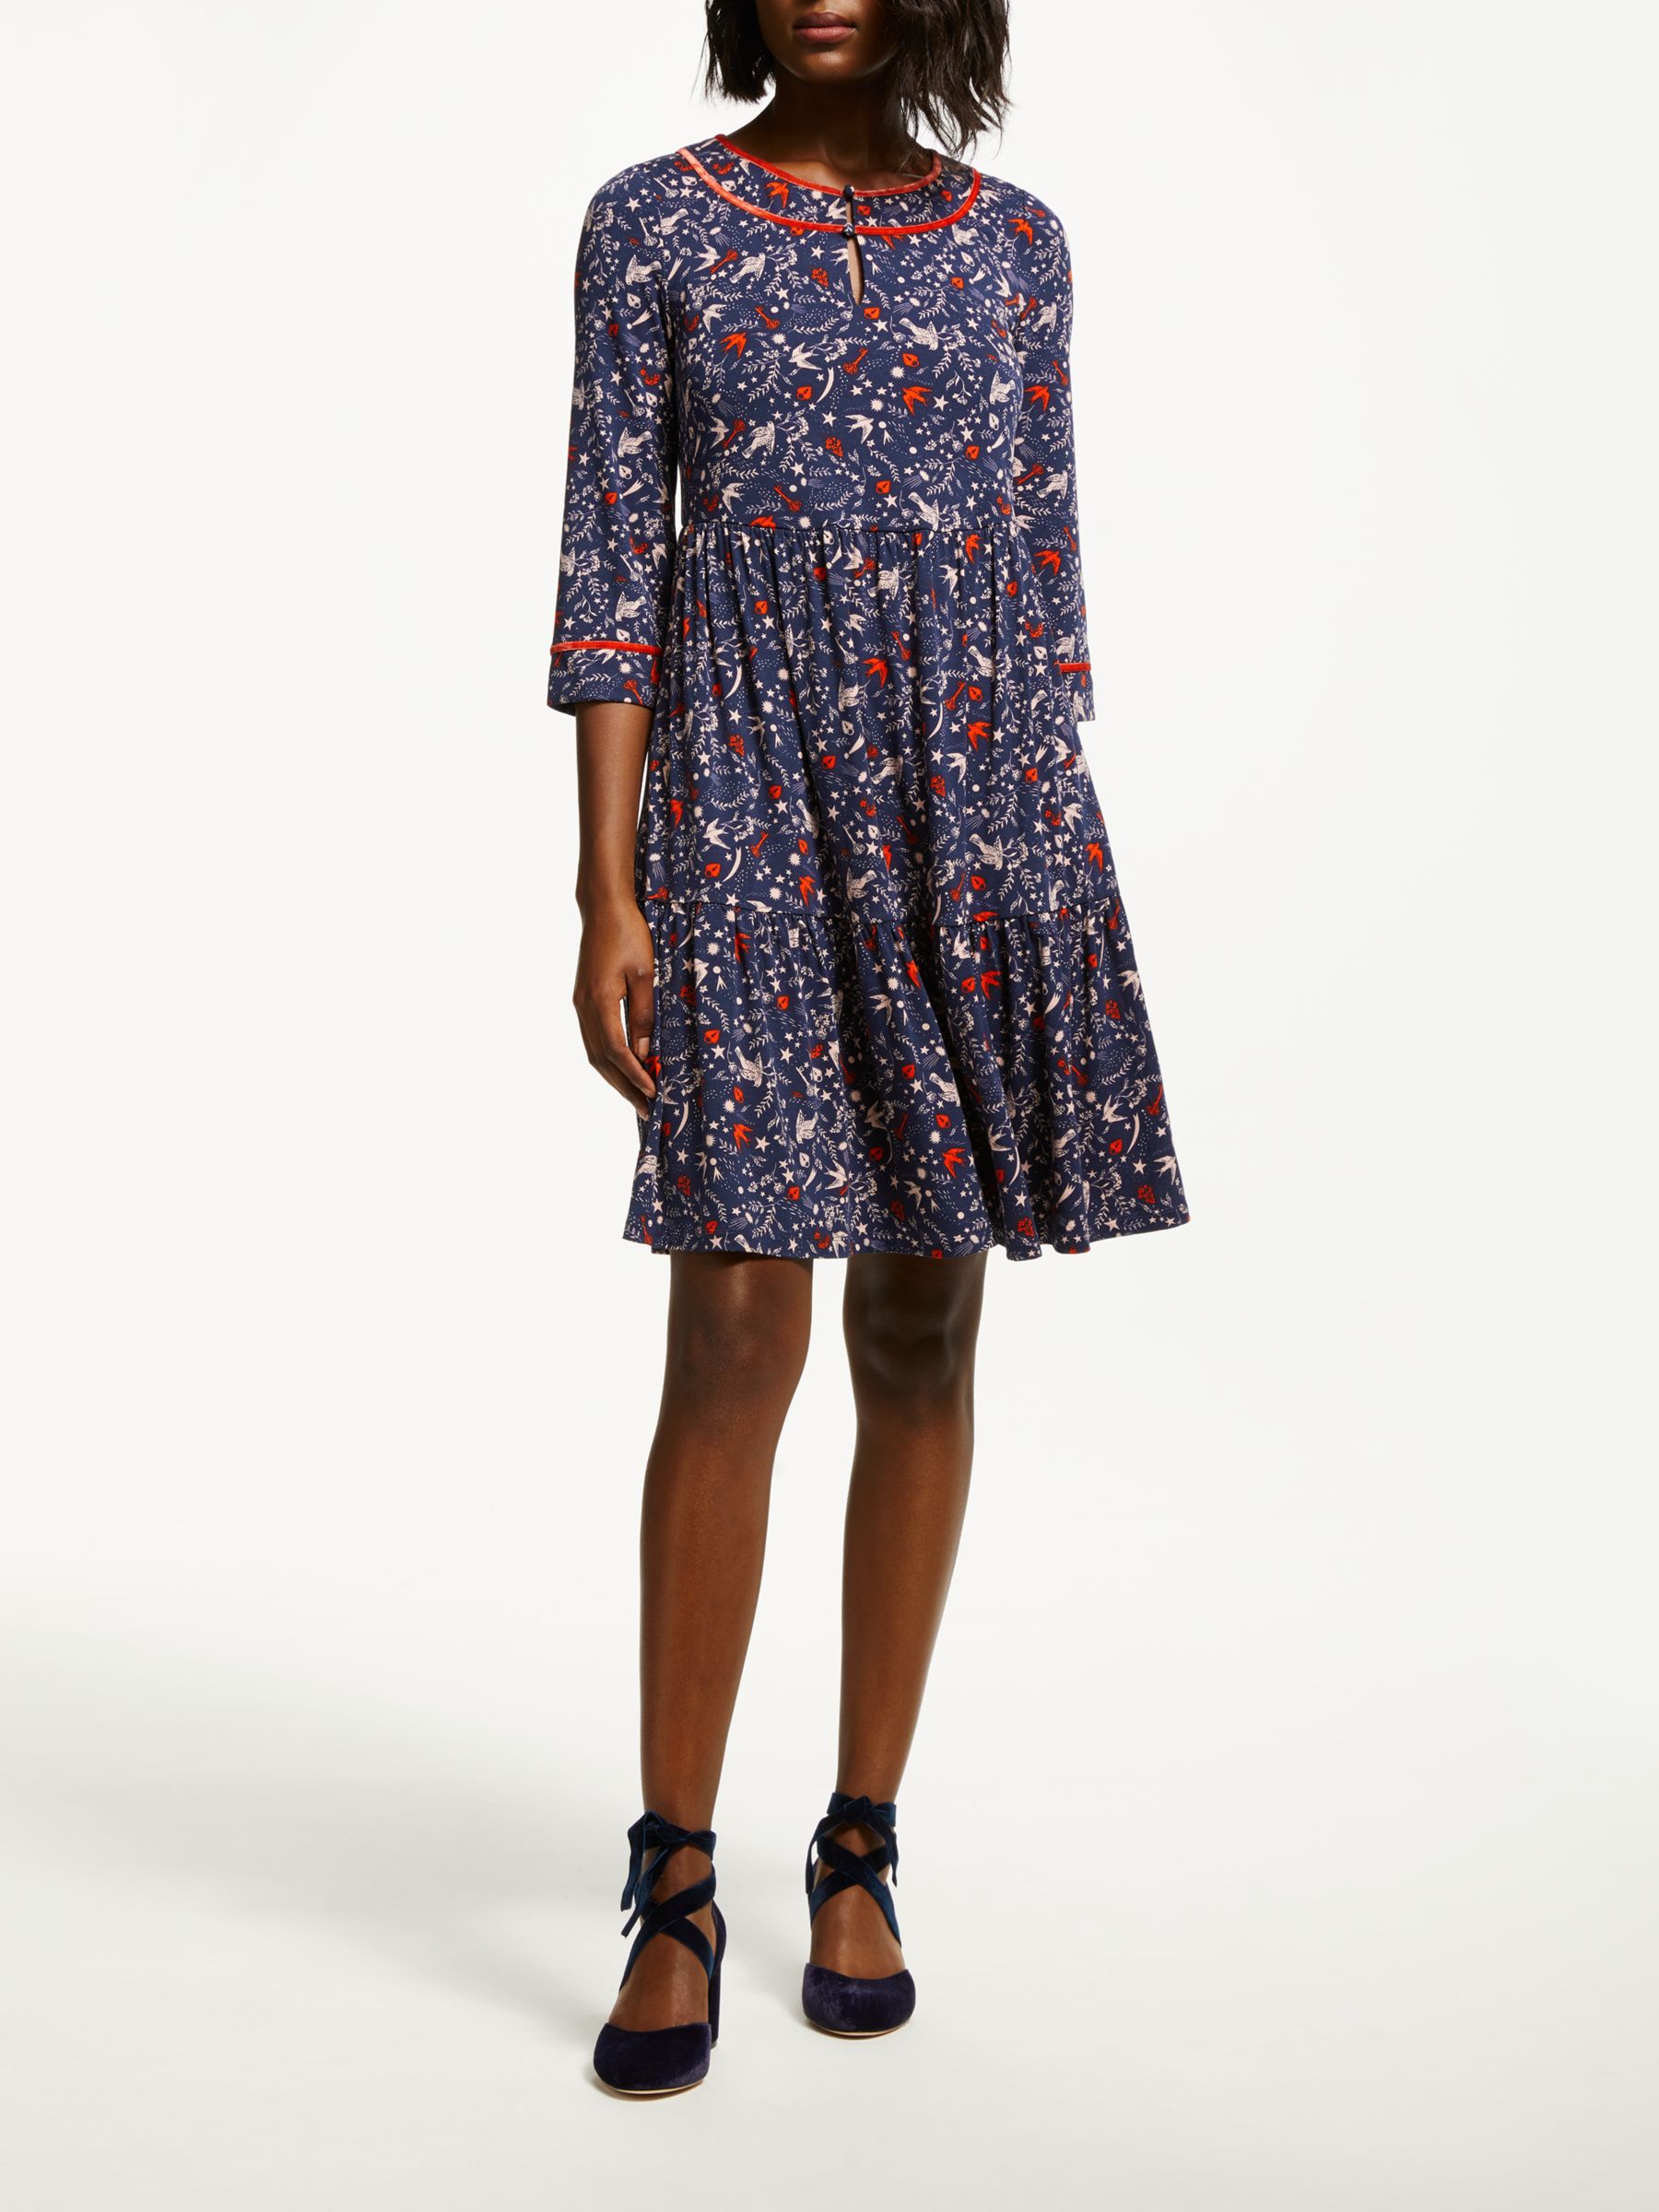 Boden Claire Jersey Dress, Navy at John 